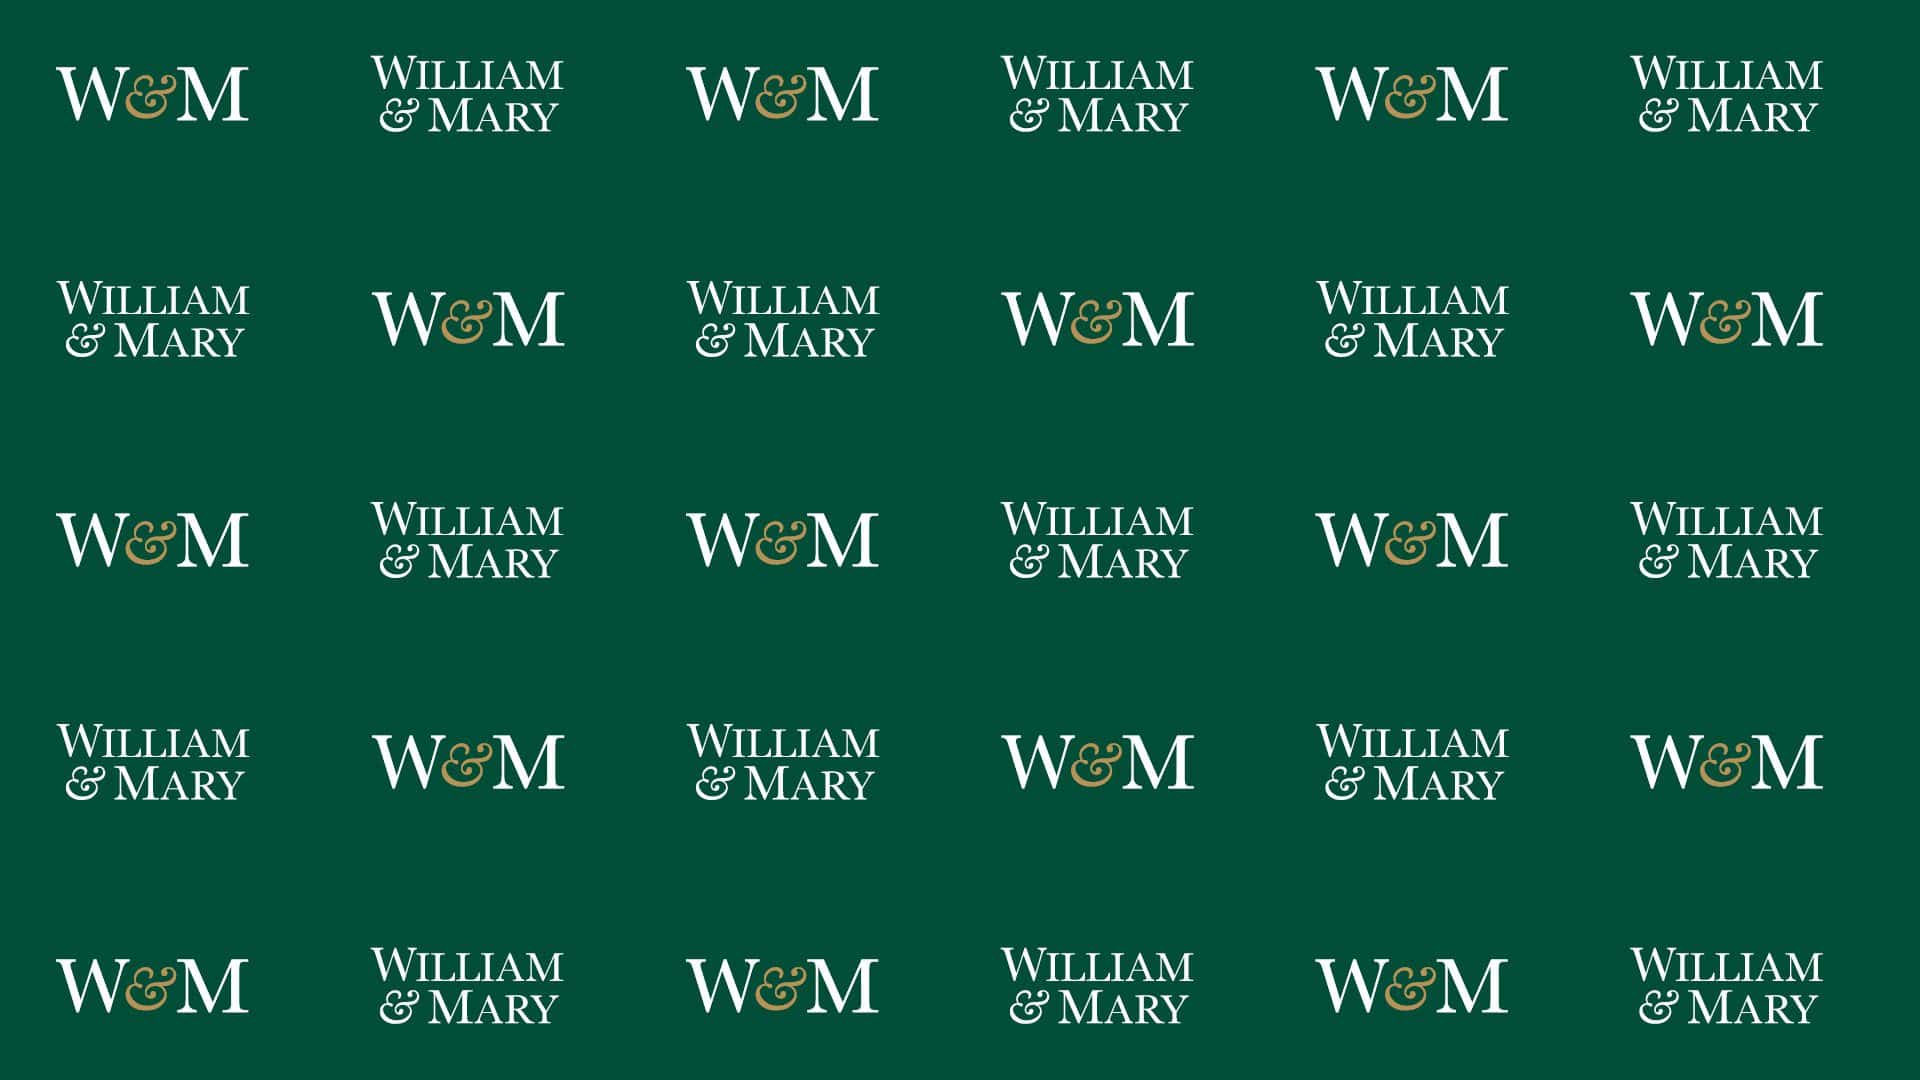 Federal Spend on Universities – #13 (tied) College of William and Mary